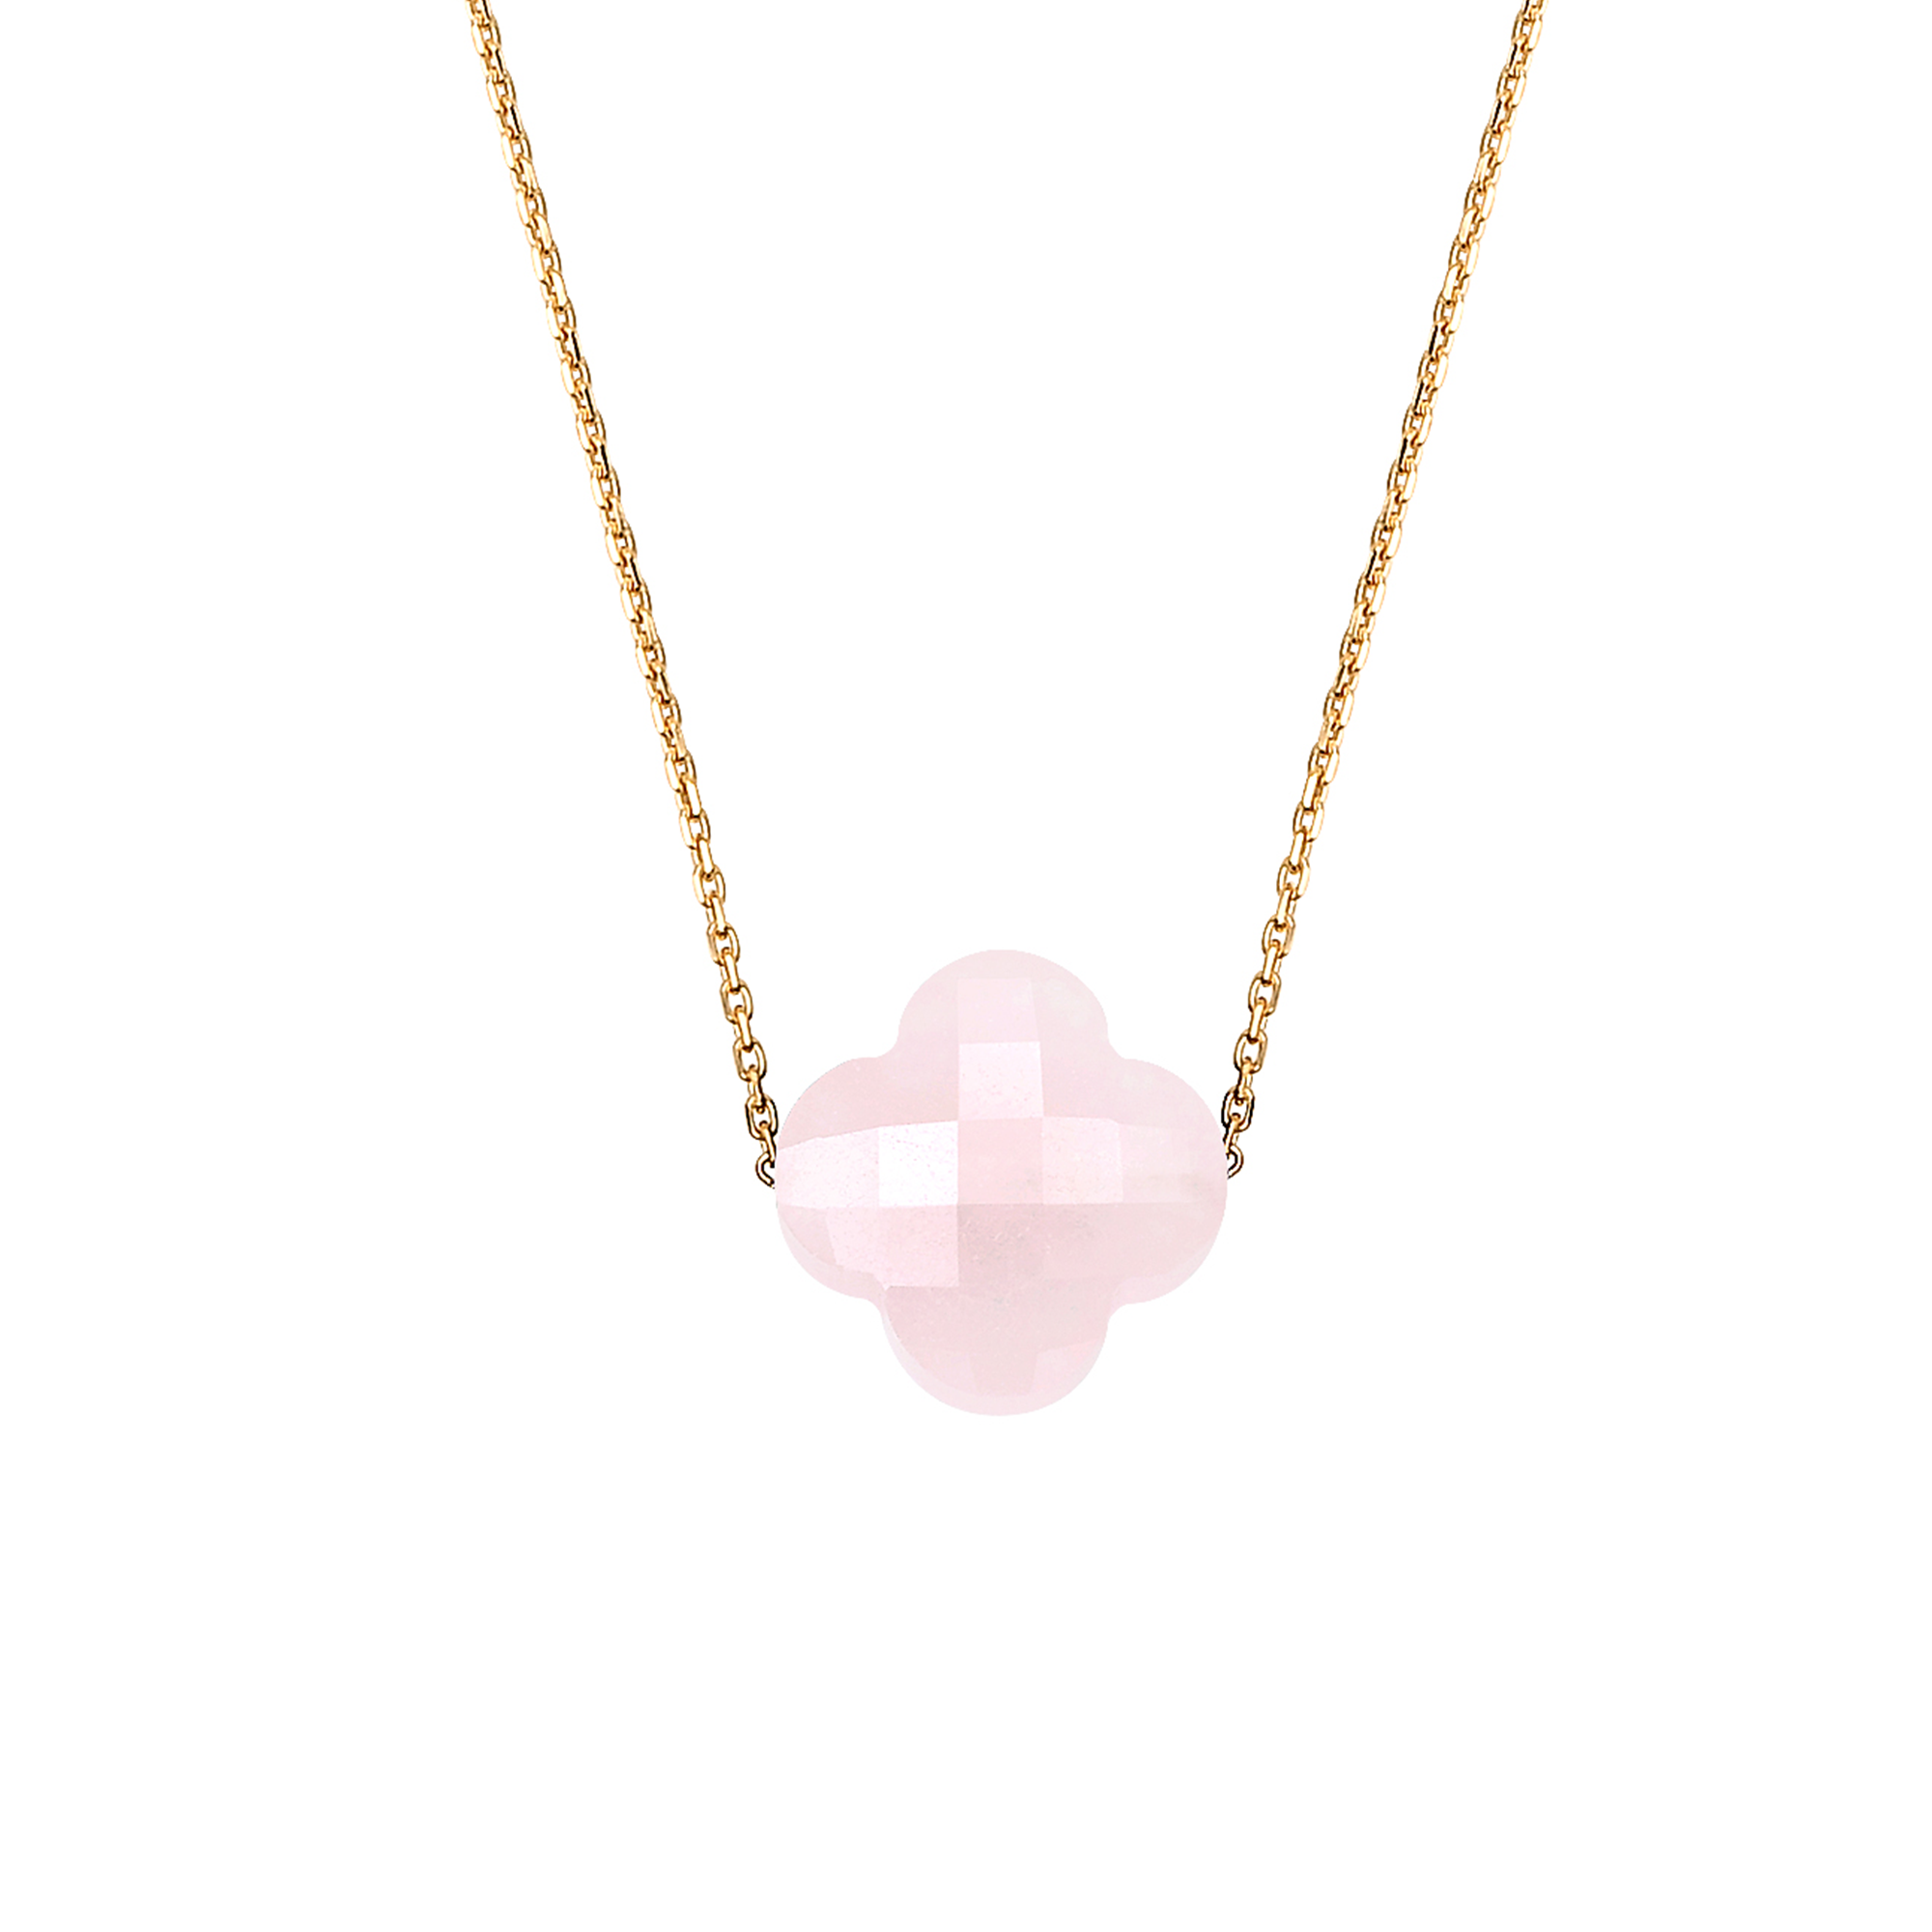 RED QUARTZ CLOVER YELLOW GOLD NECKLACE